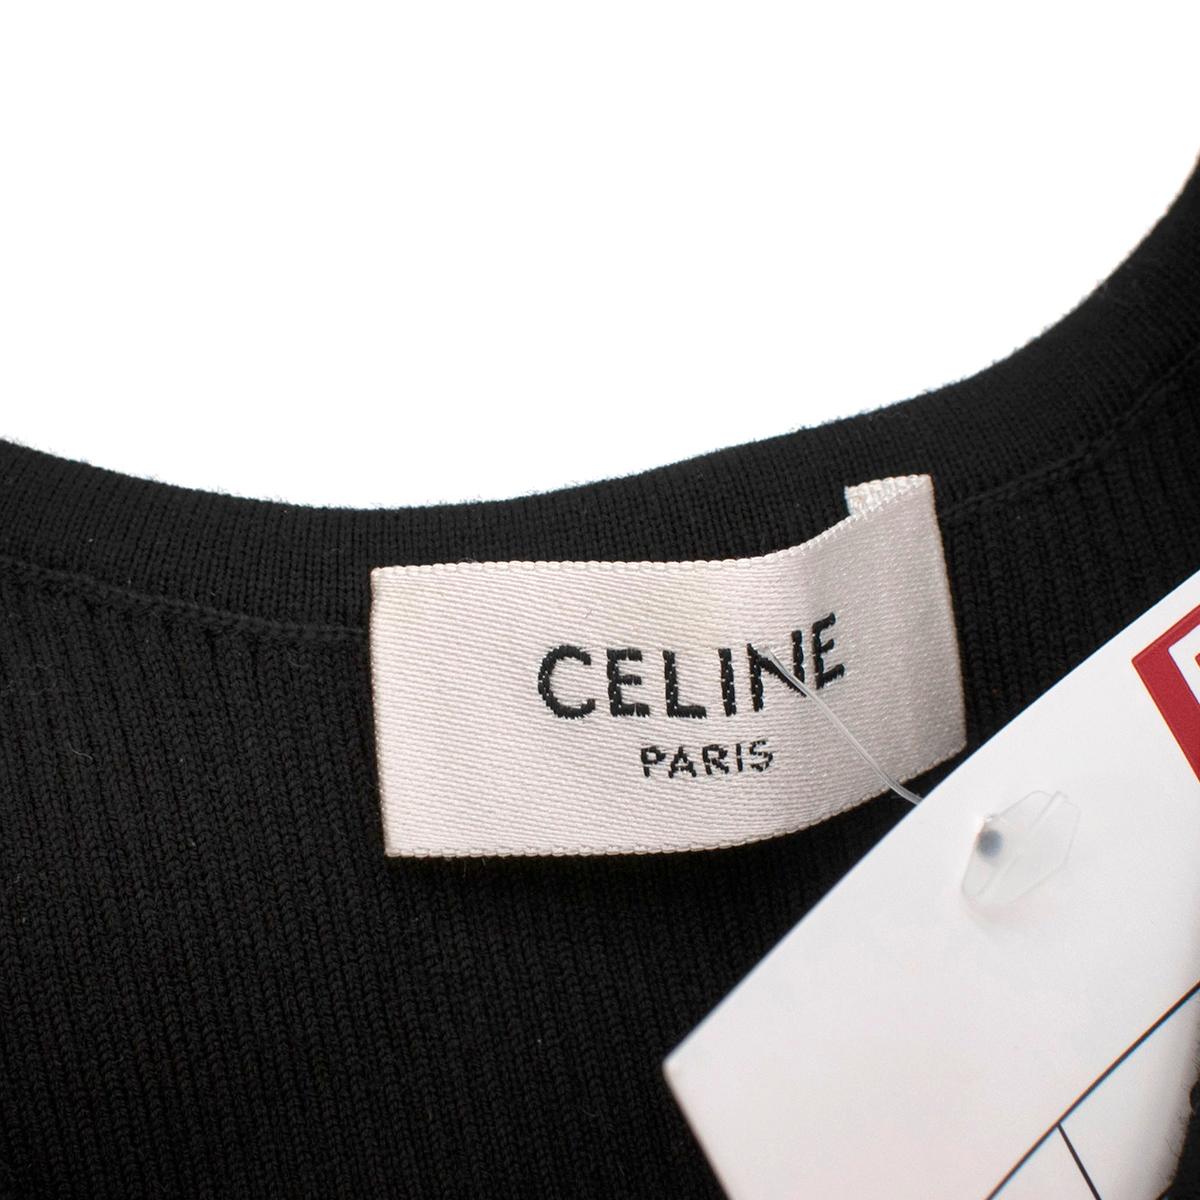 Celine Athletic Cotton Knit Black Sports Bra - Size M Sold Out - Us size 8 In New Condition For Sale In London, GB